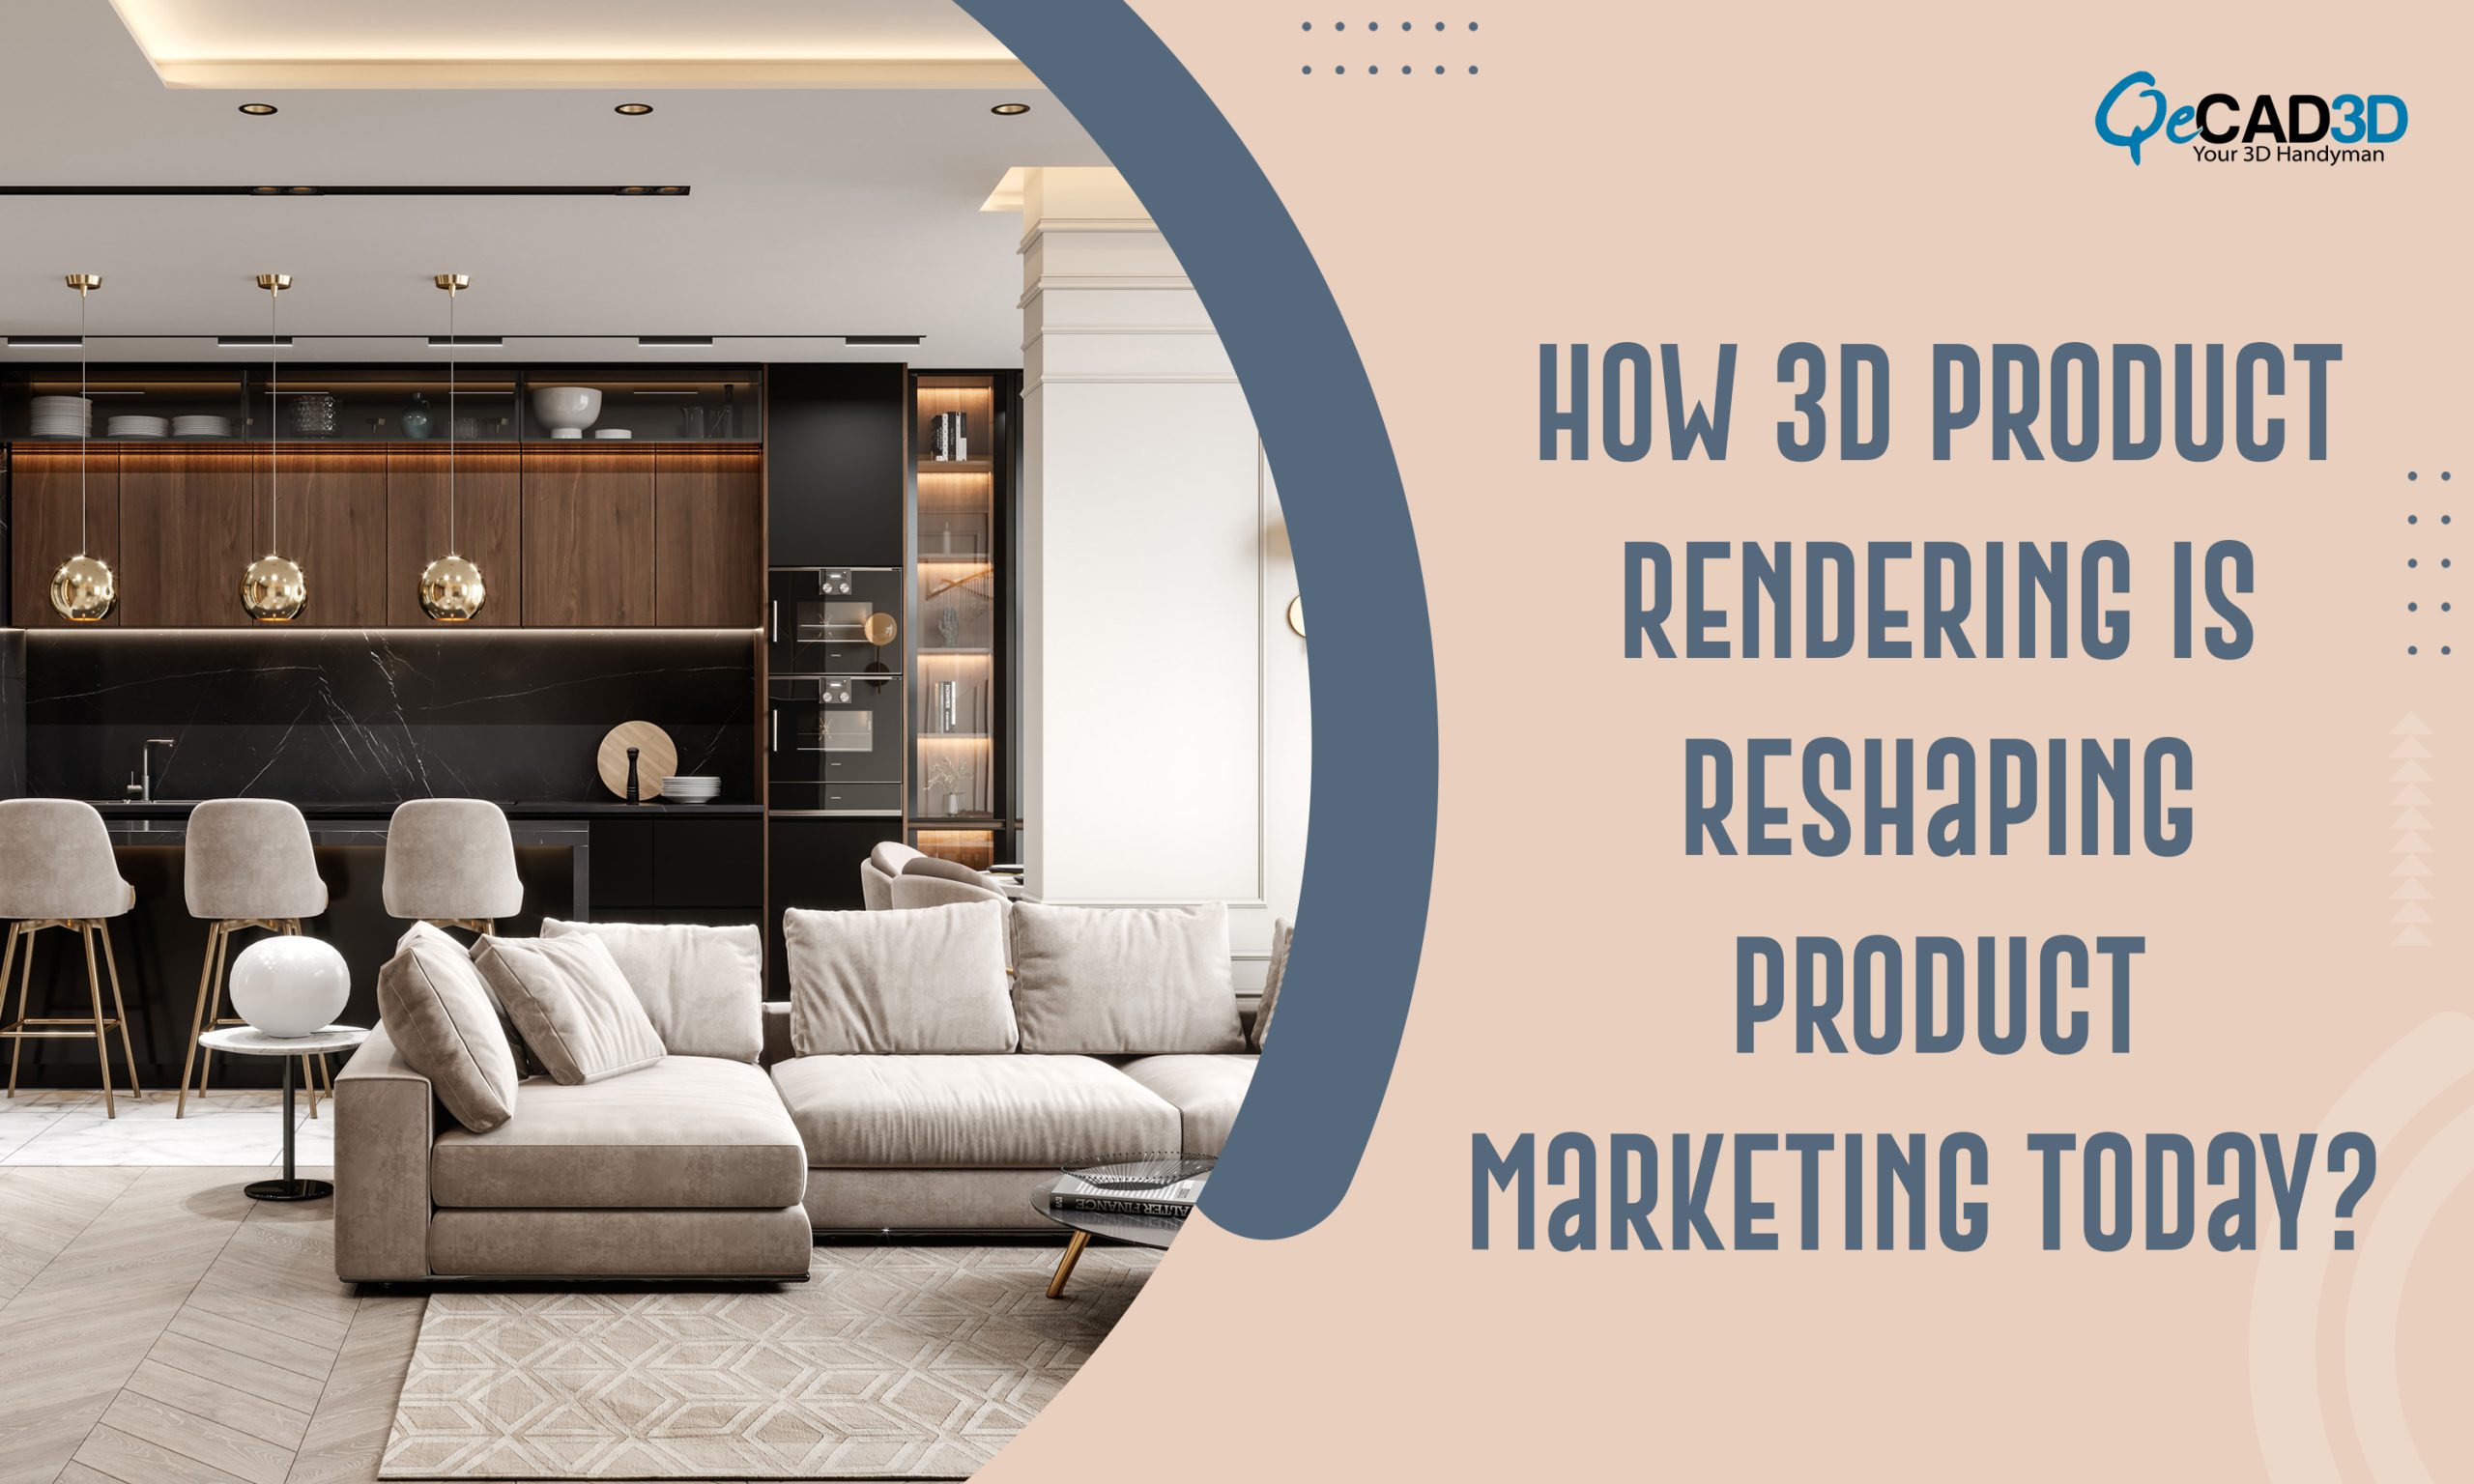 3D Product Rendering is Reshaping Product Marketing Today?